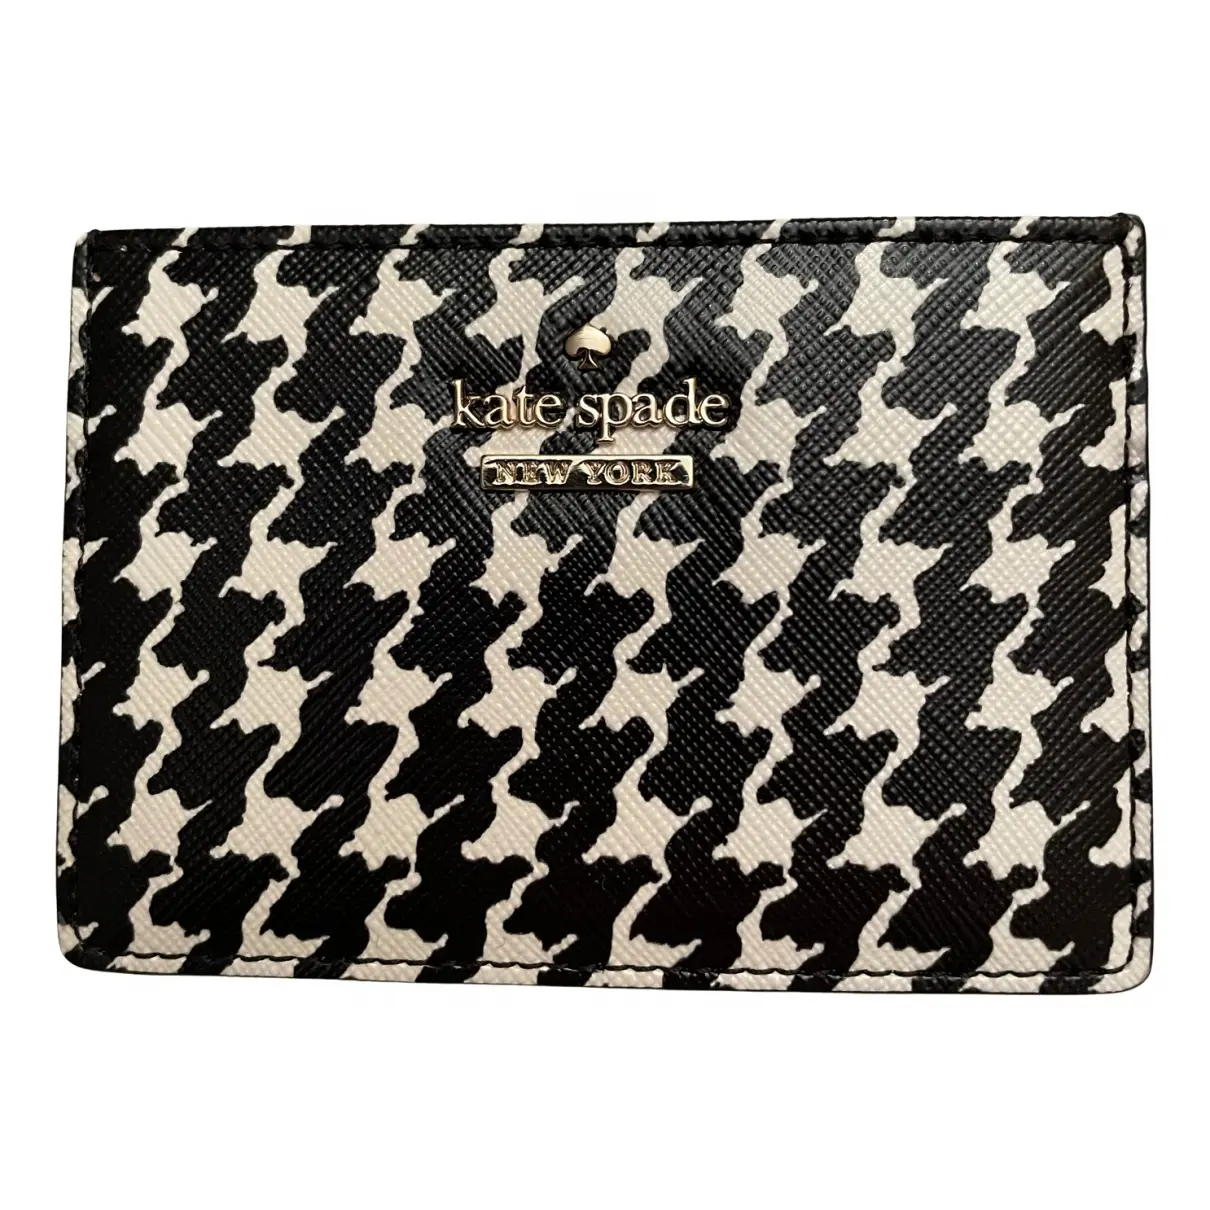 Leather wallet Kate Spade